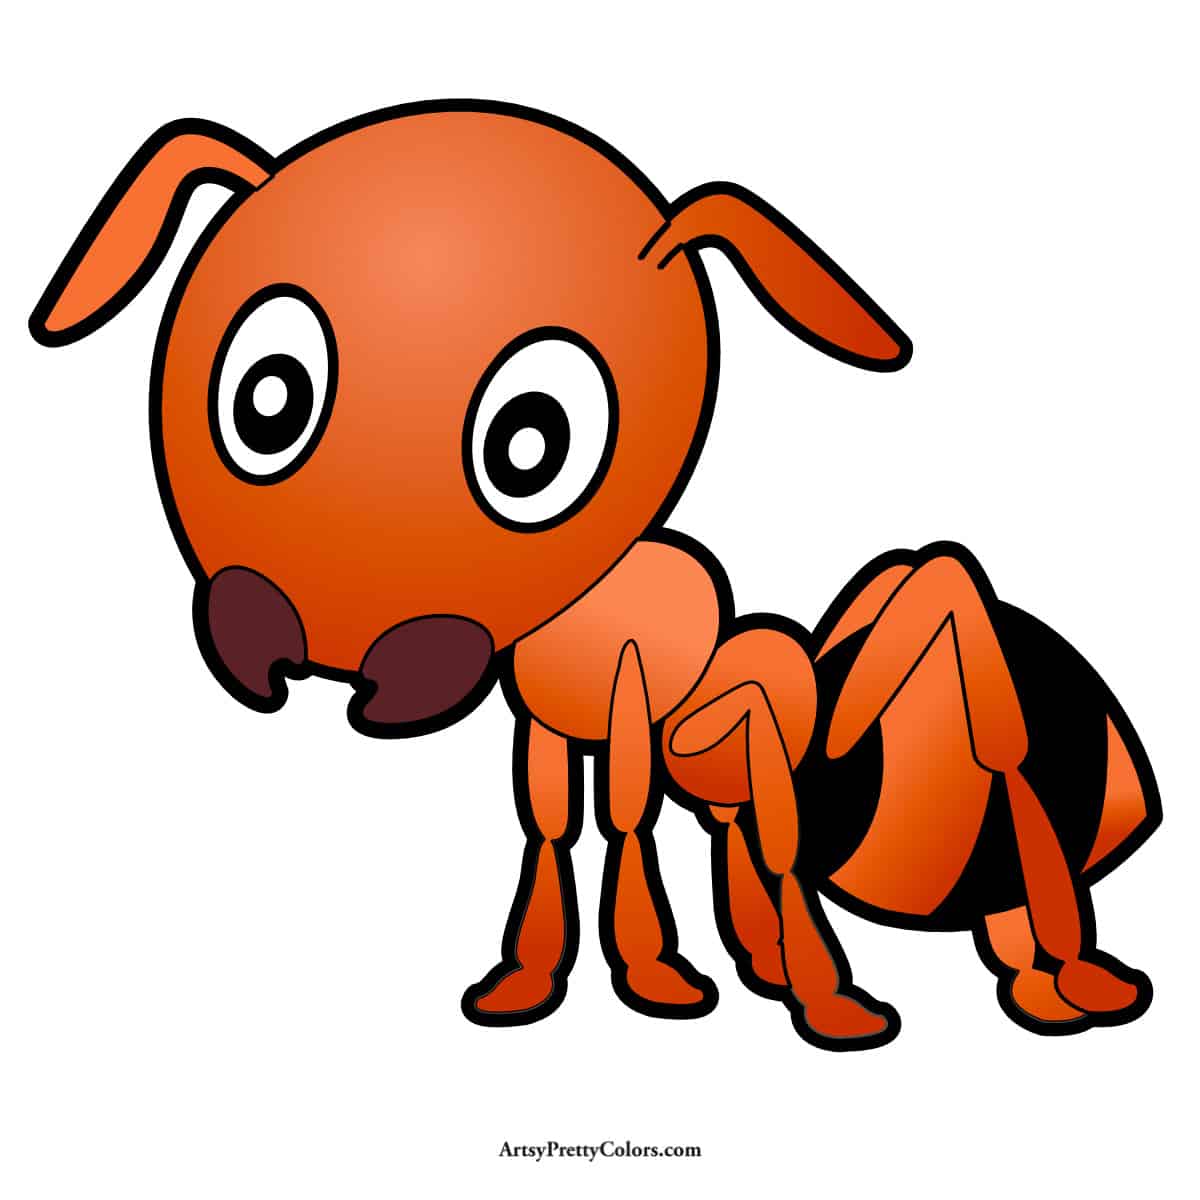 orangey-brown colored in illustration of an ant